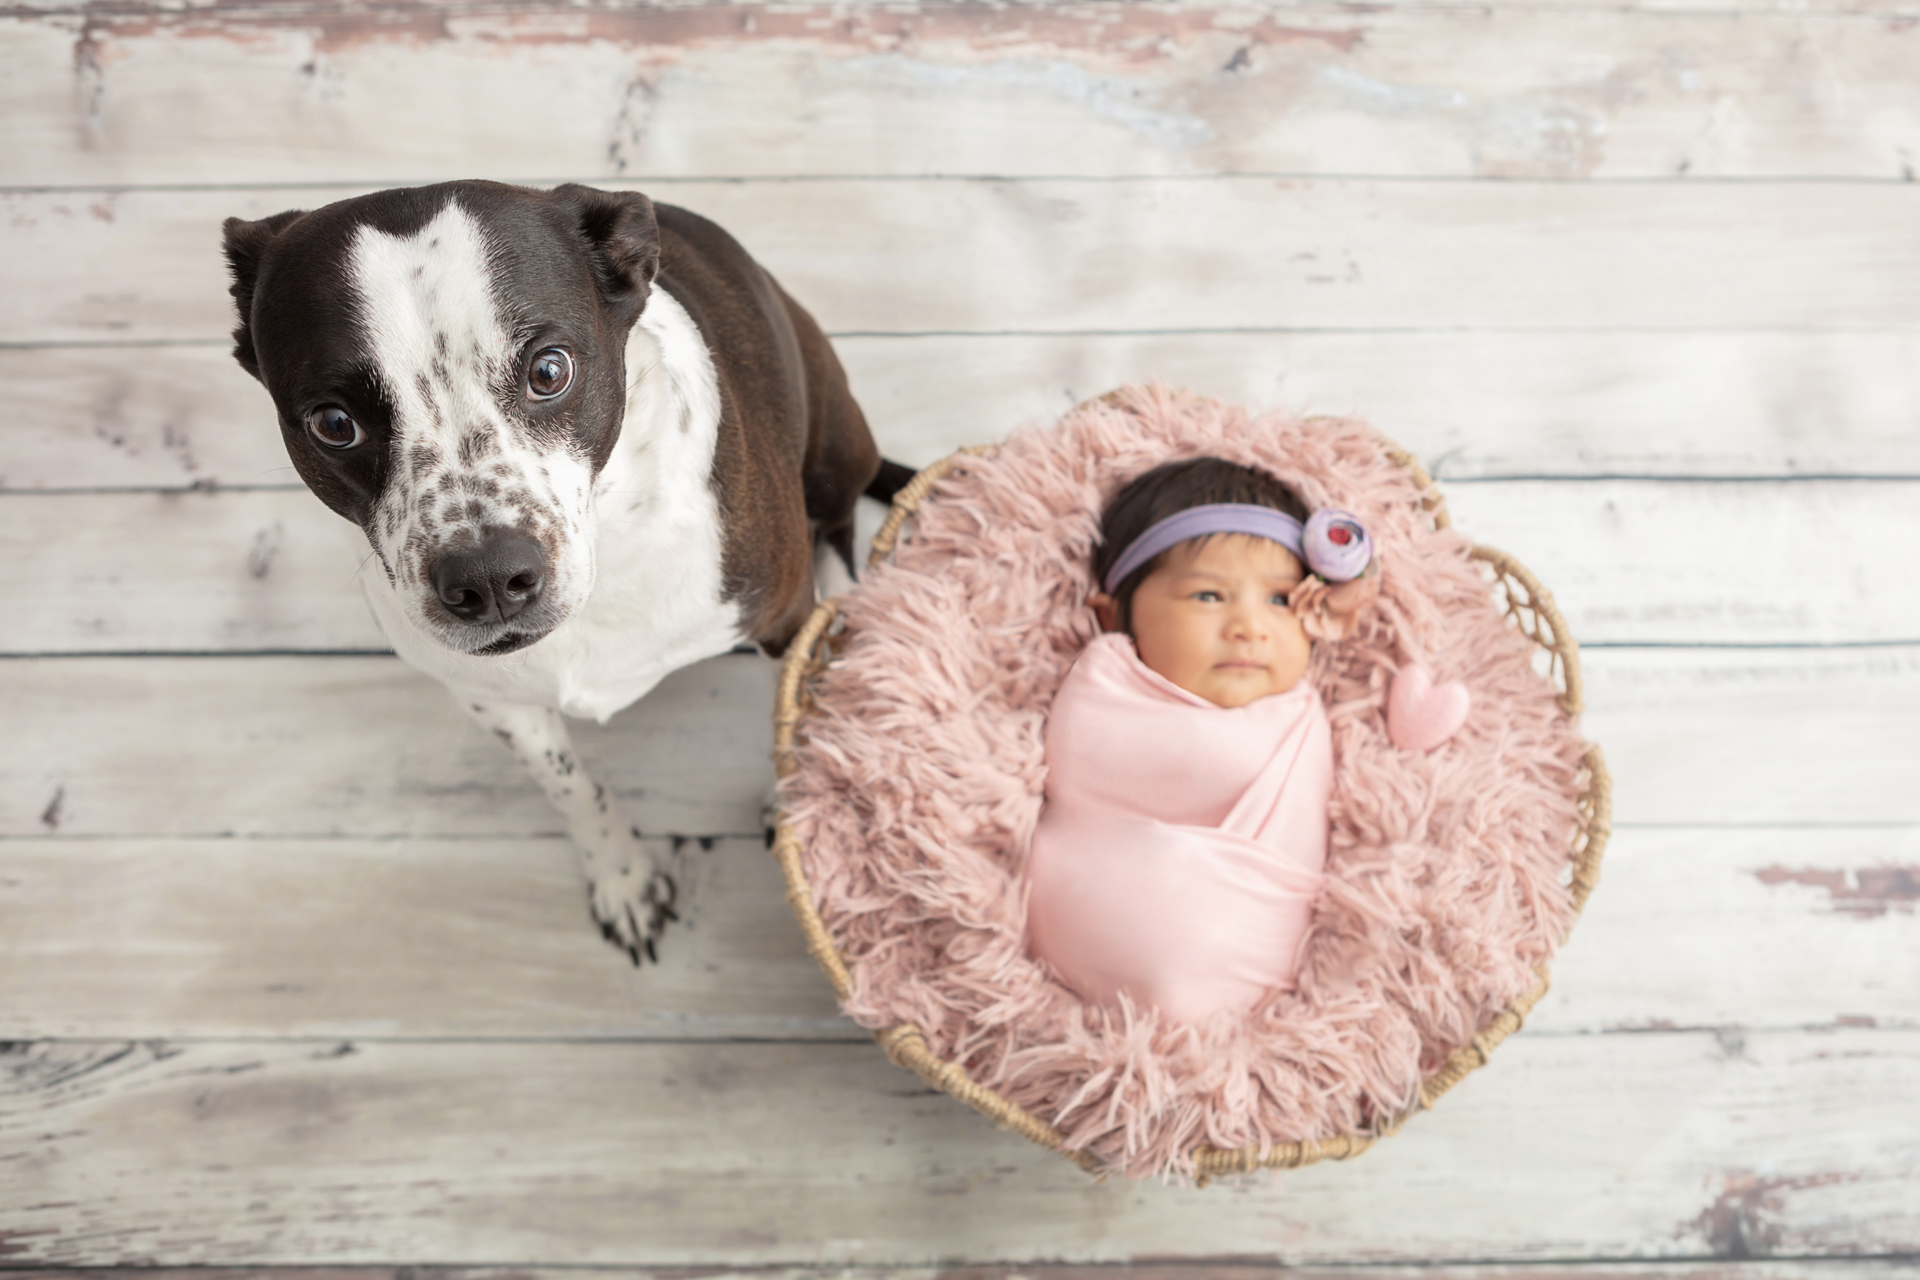 Boston Terrier cattle dog mix with his new baby sister who is wrapped in light pink